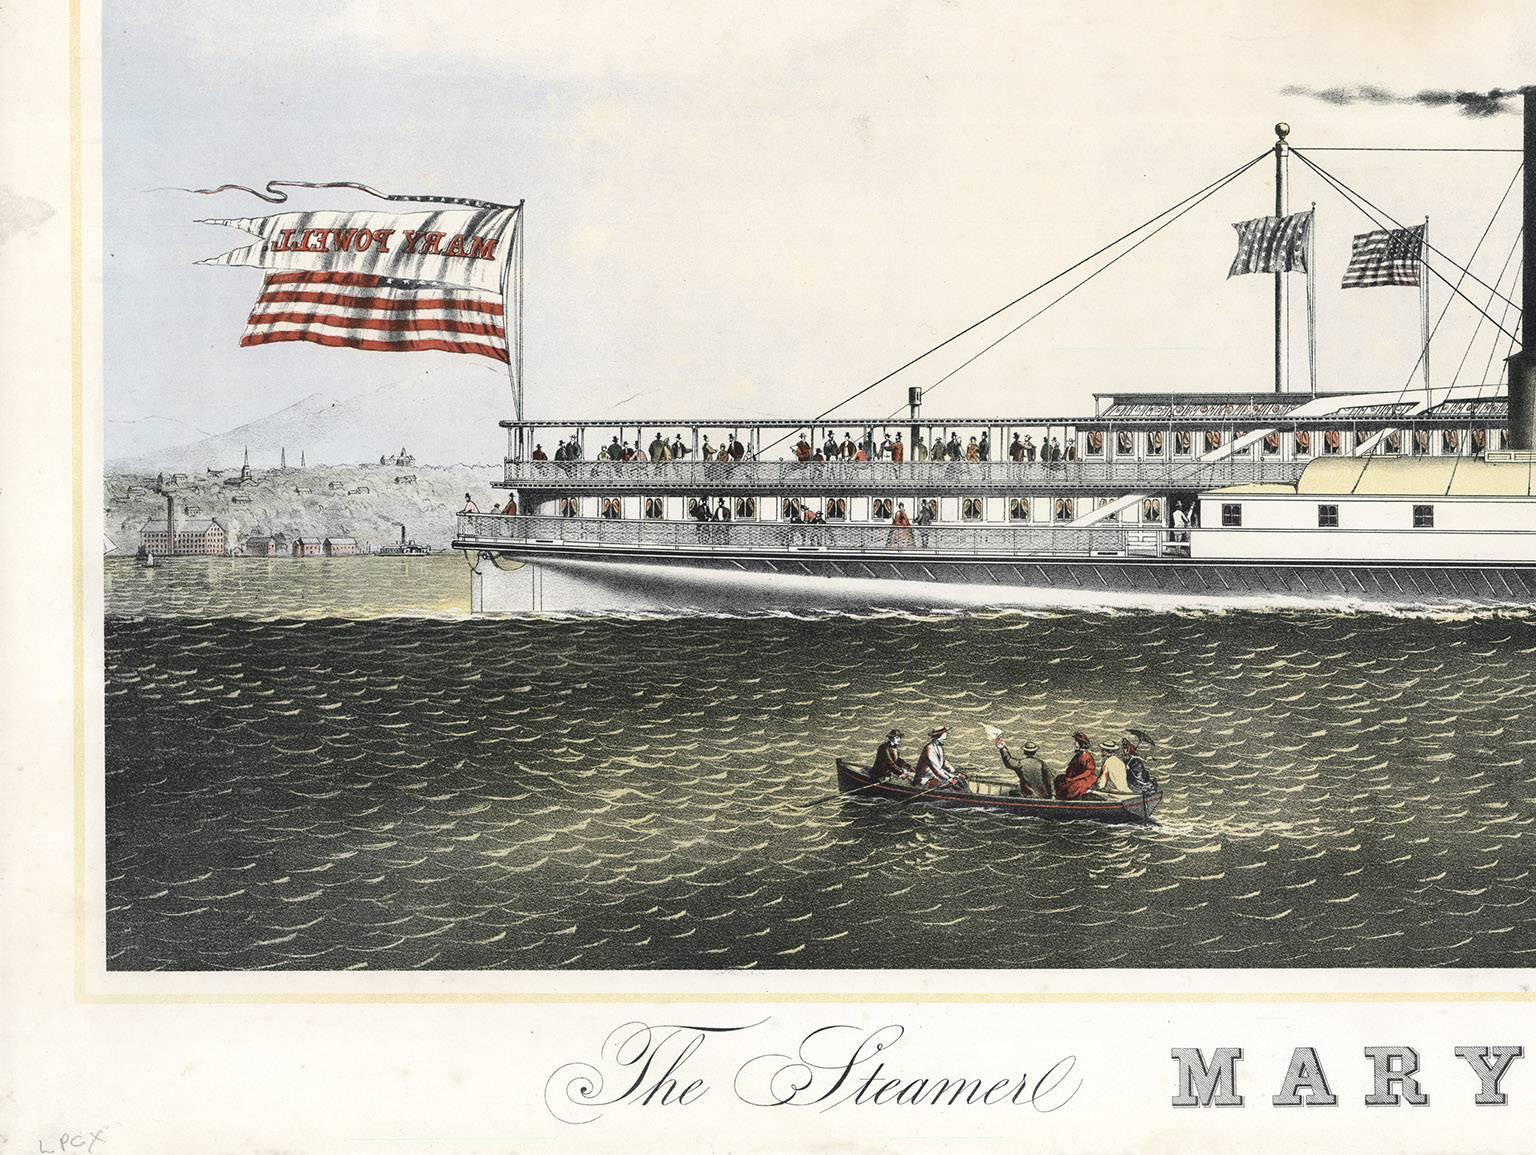 THE STEAMER MARY POWELL. CAPTN. FERDINAND FROST - Print by Charles Parsons